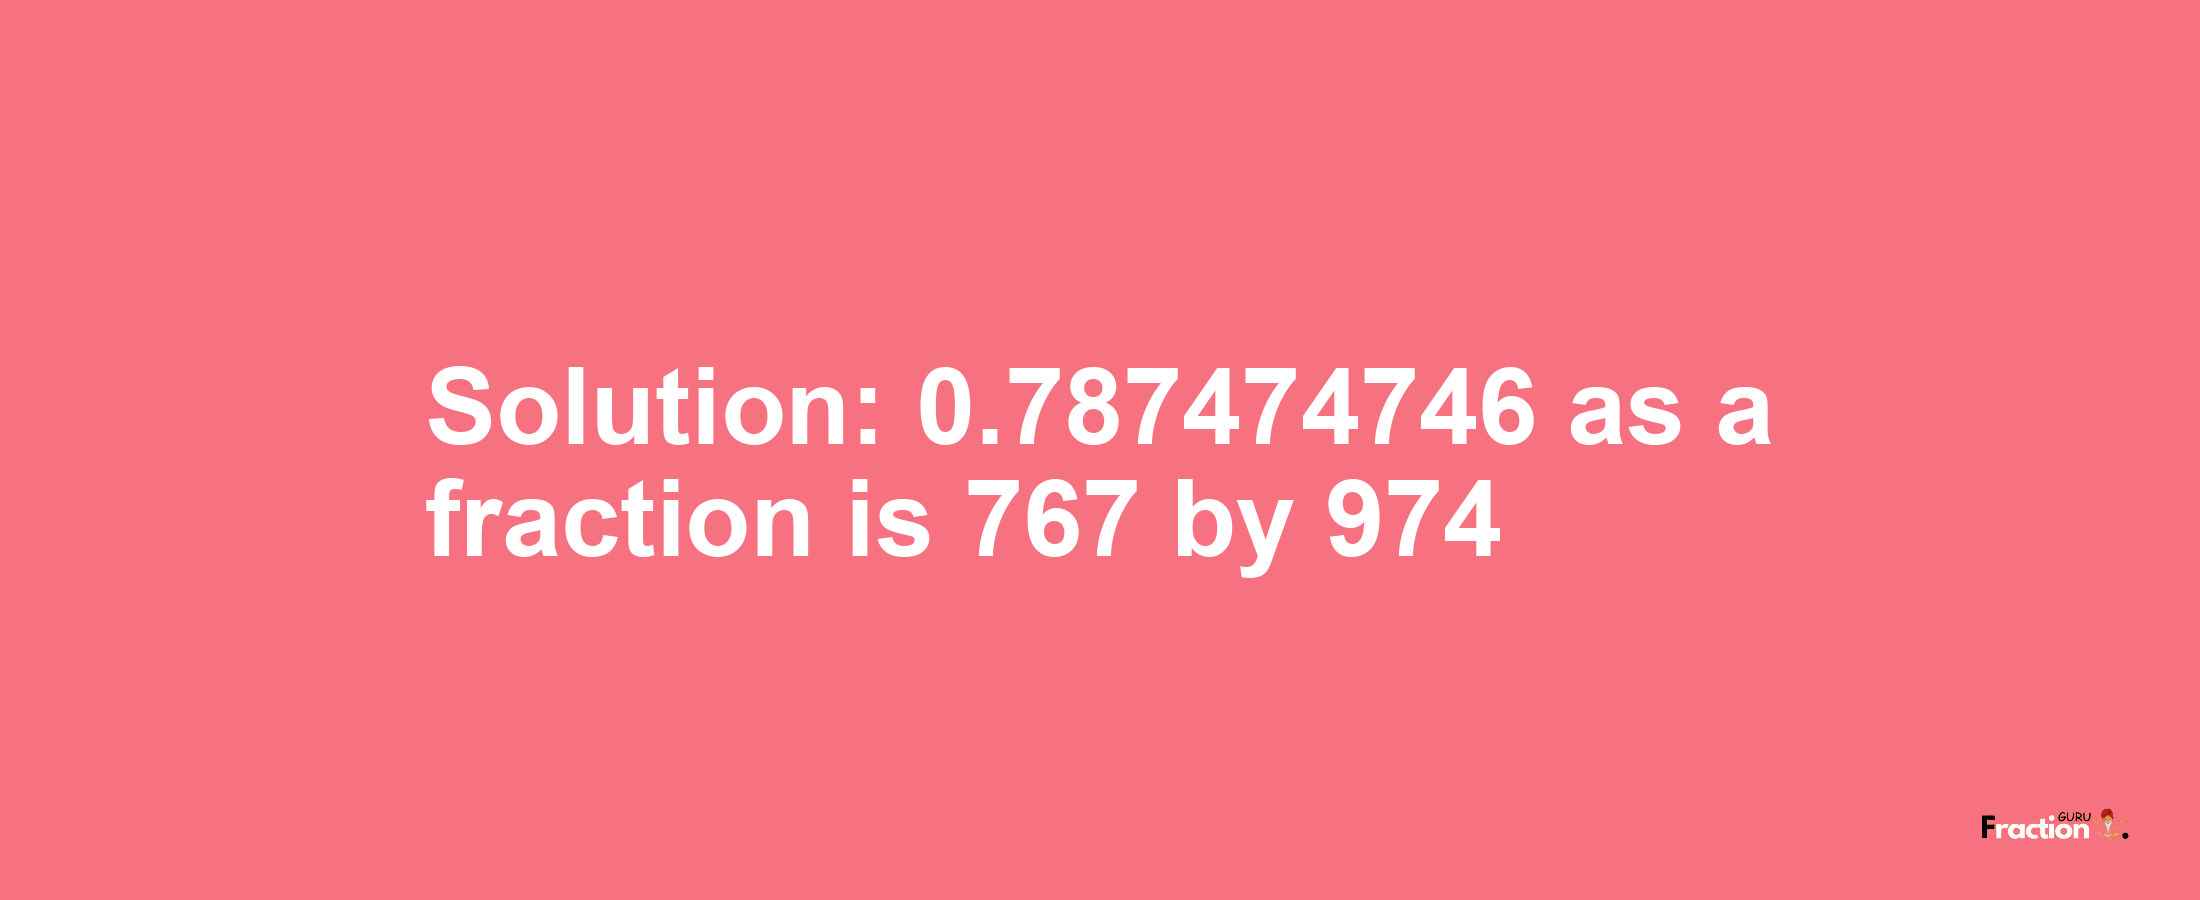 Solution:0.787474746 as a fraction is 767/974